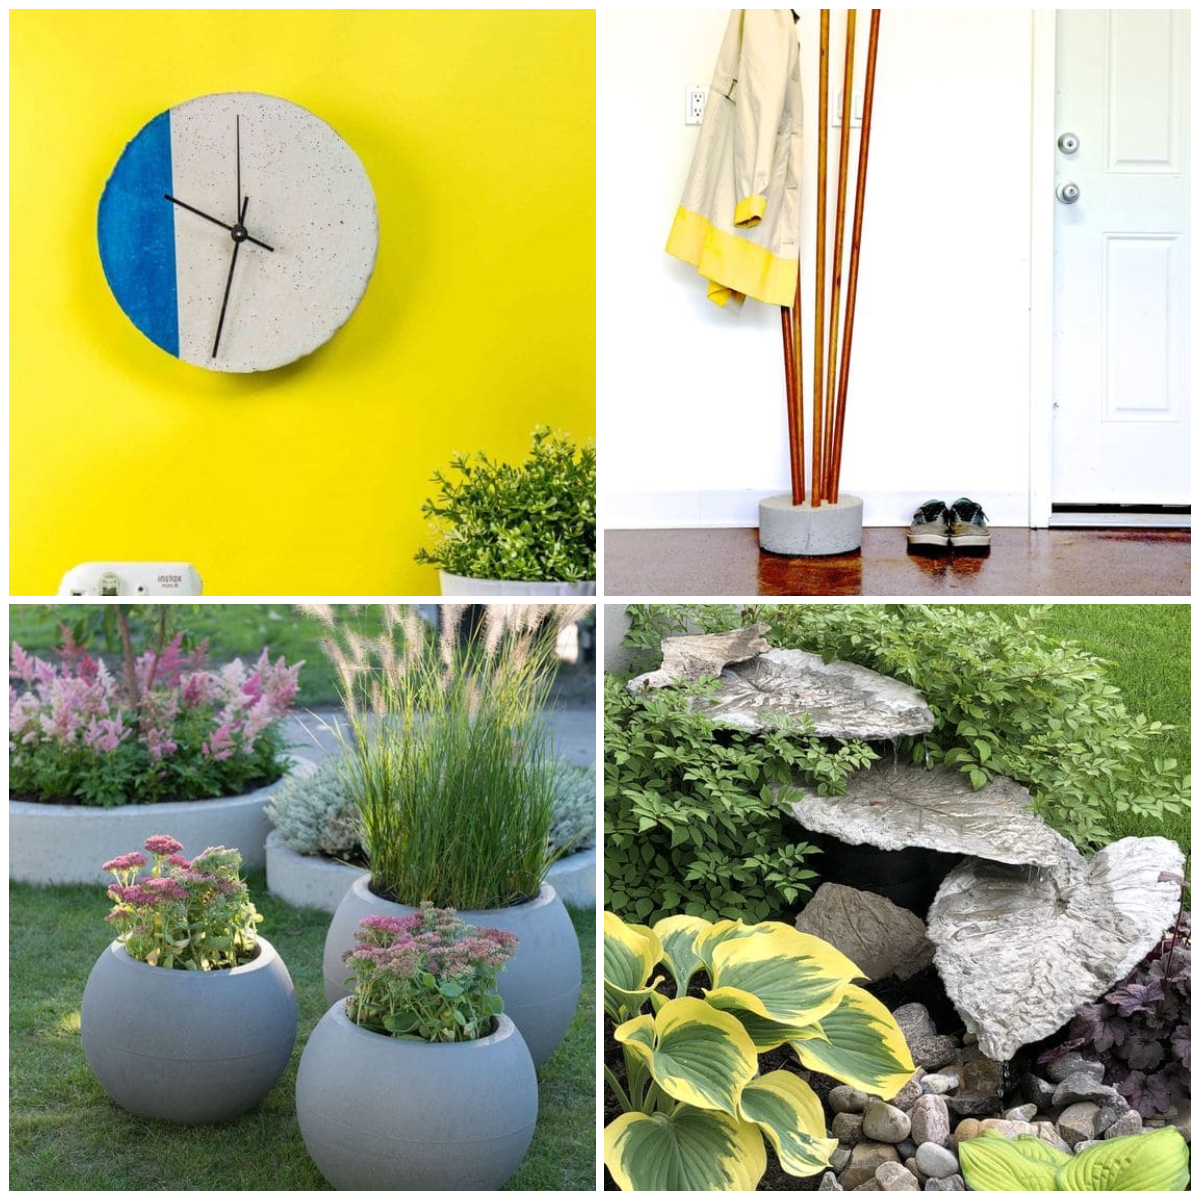 24 Easy and Creative DIY Concrete Projects to Decorate Indoor and Outdoor Space